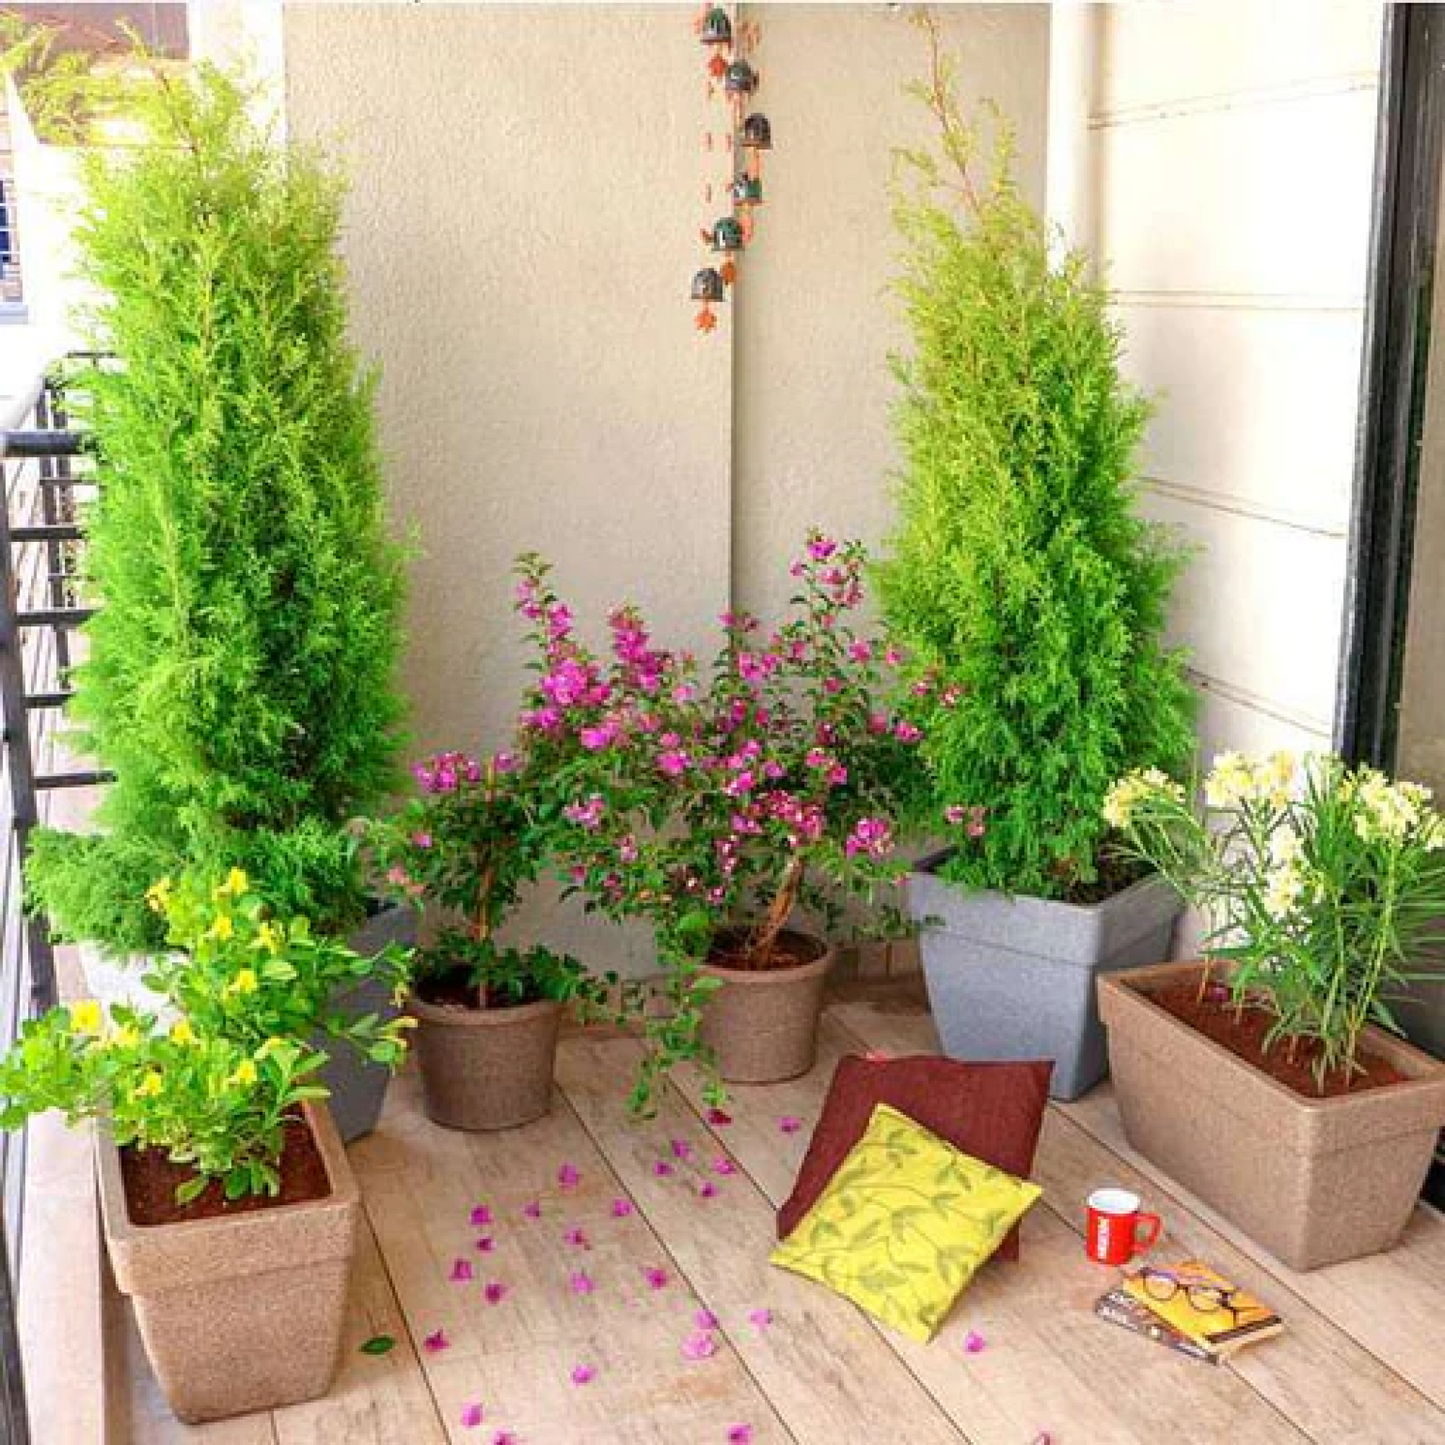 Transform a Sunny Balcony with Perennial Flowering and Foliage Garden Plants